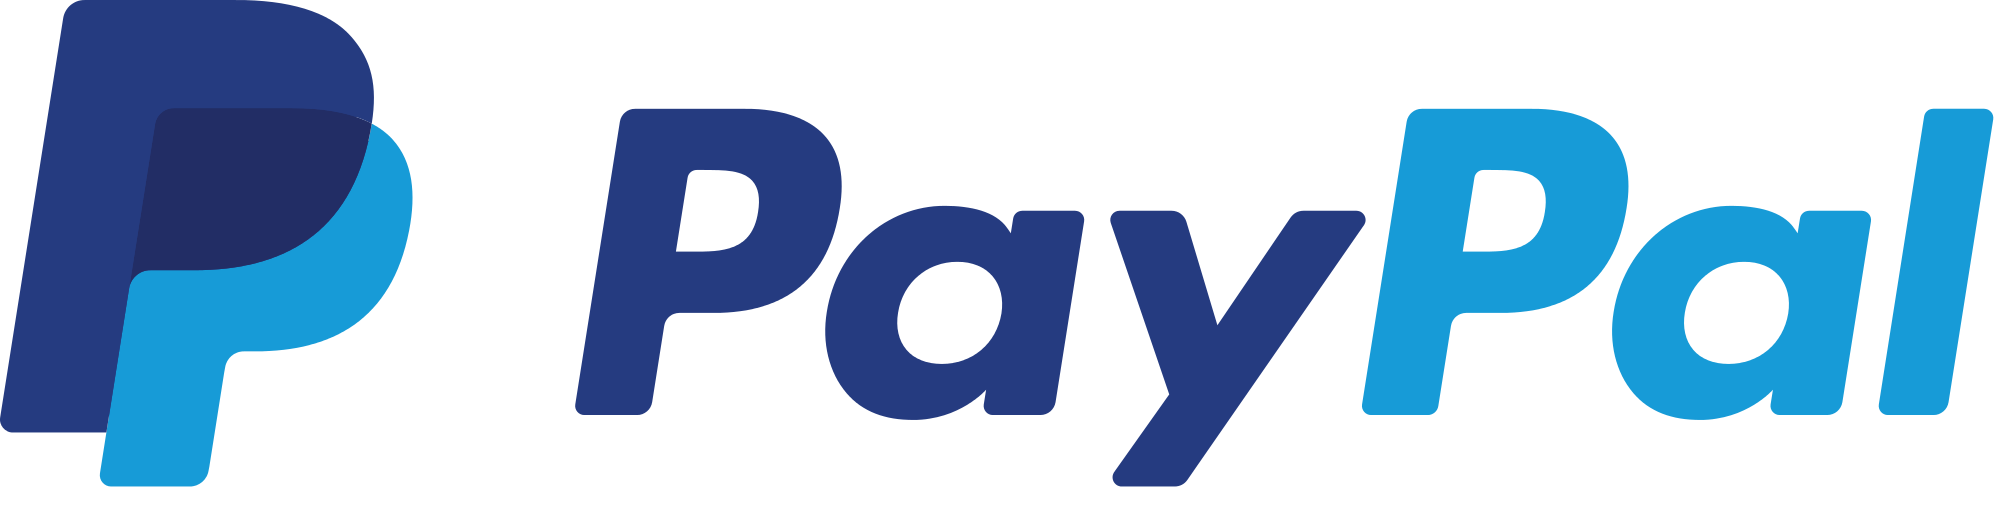 Paypal.svg